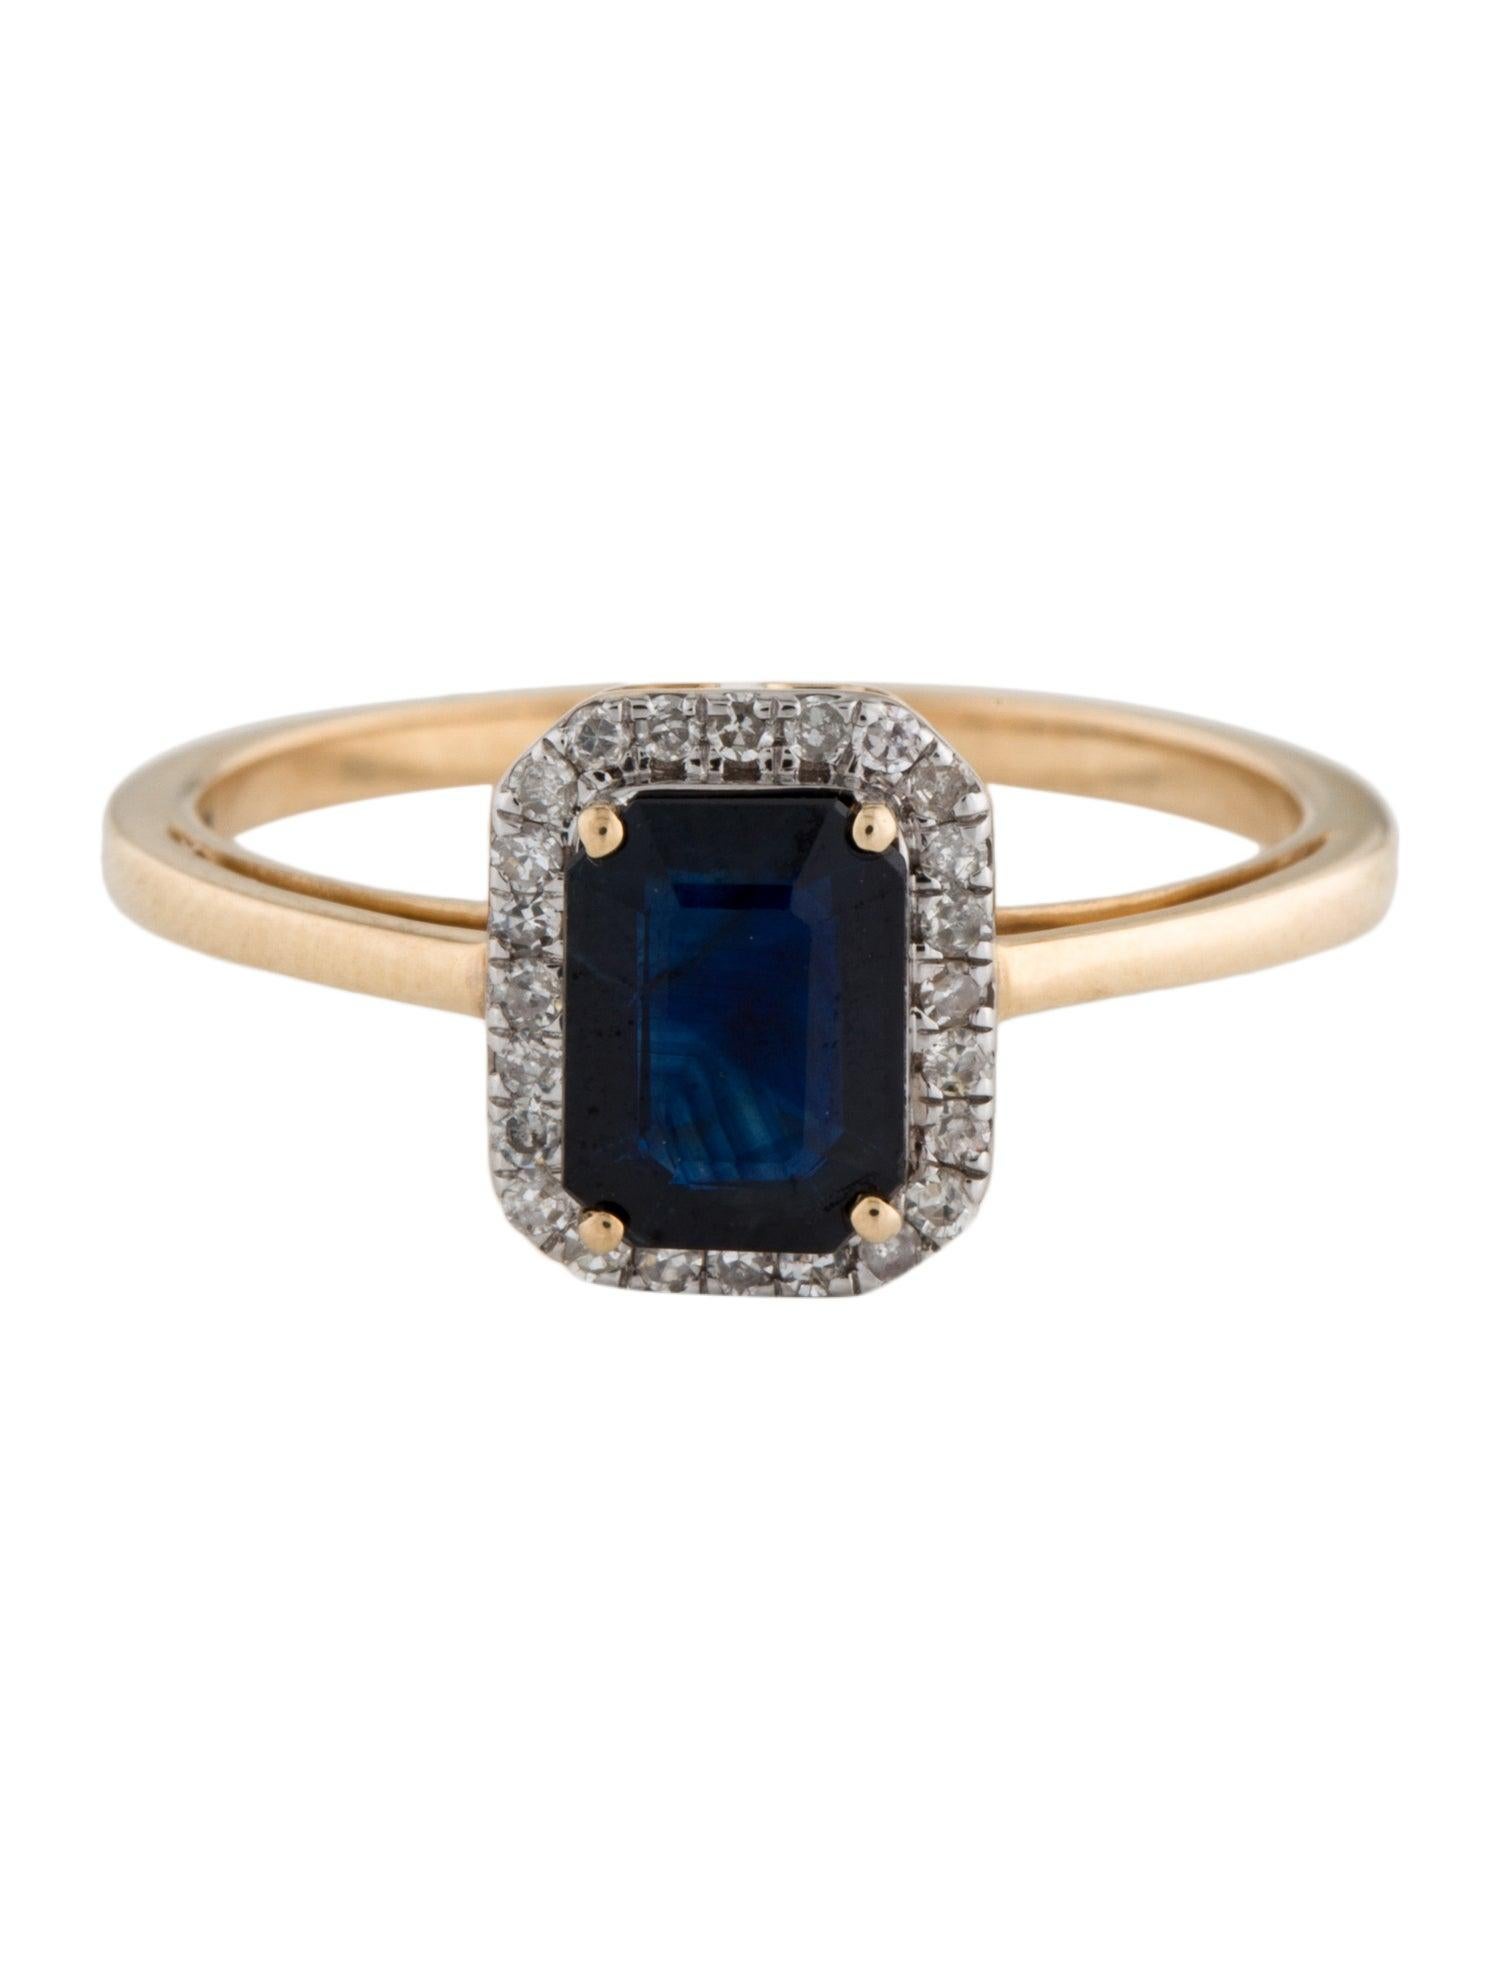 Elegant 14K Yellow Gold Emerald Cut Sapphire & Diamond Cocktail Ring, 1.11ctw In New Condition For Sale In Holtsville, NY